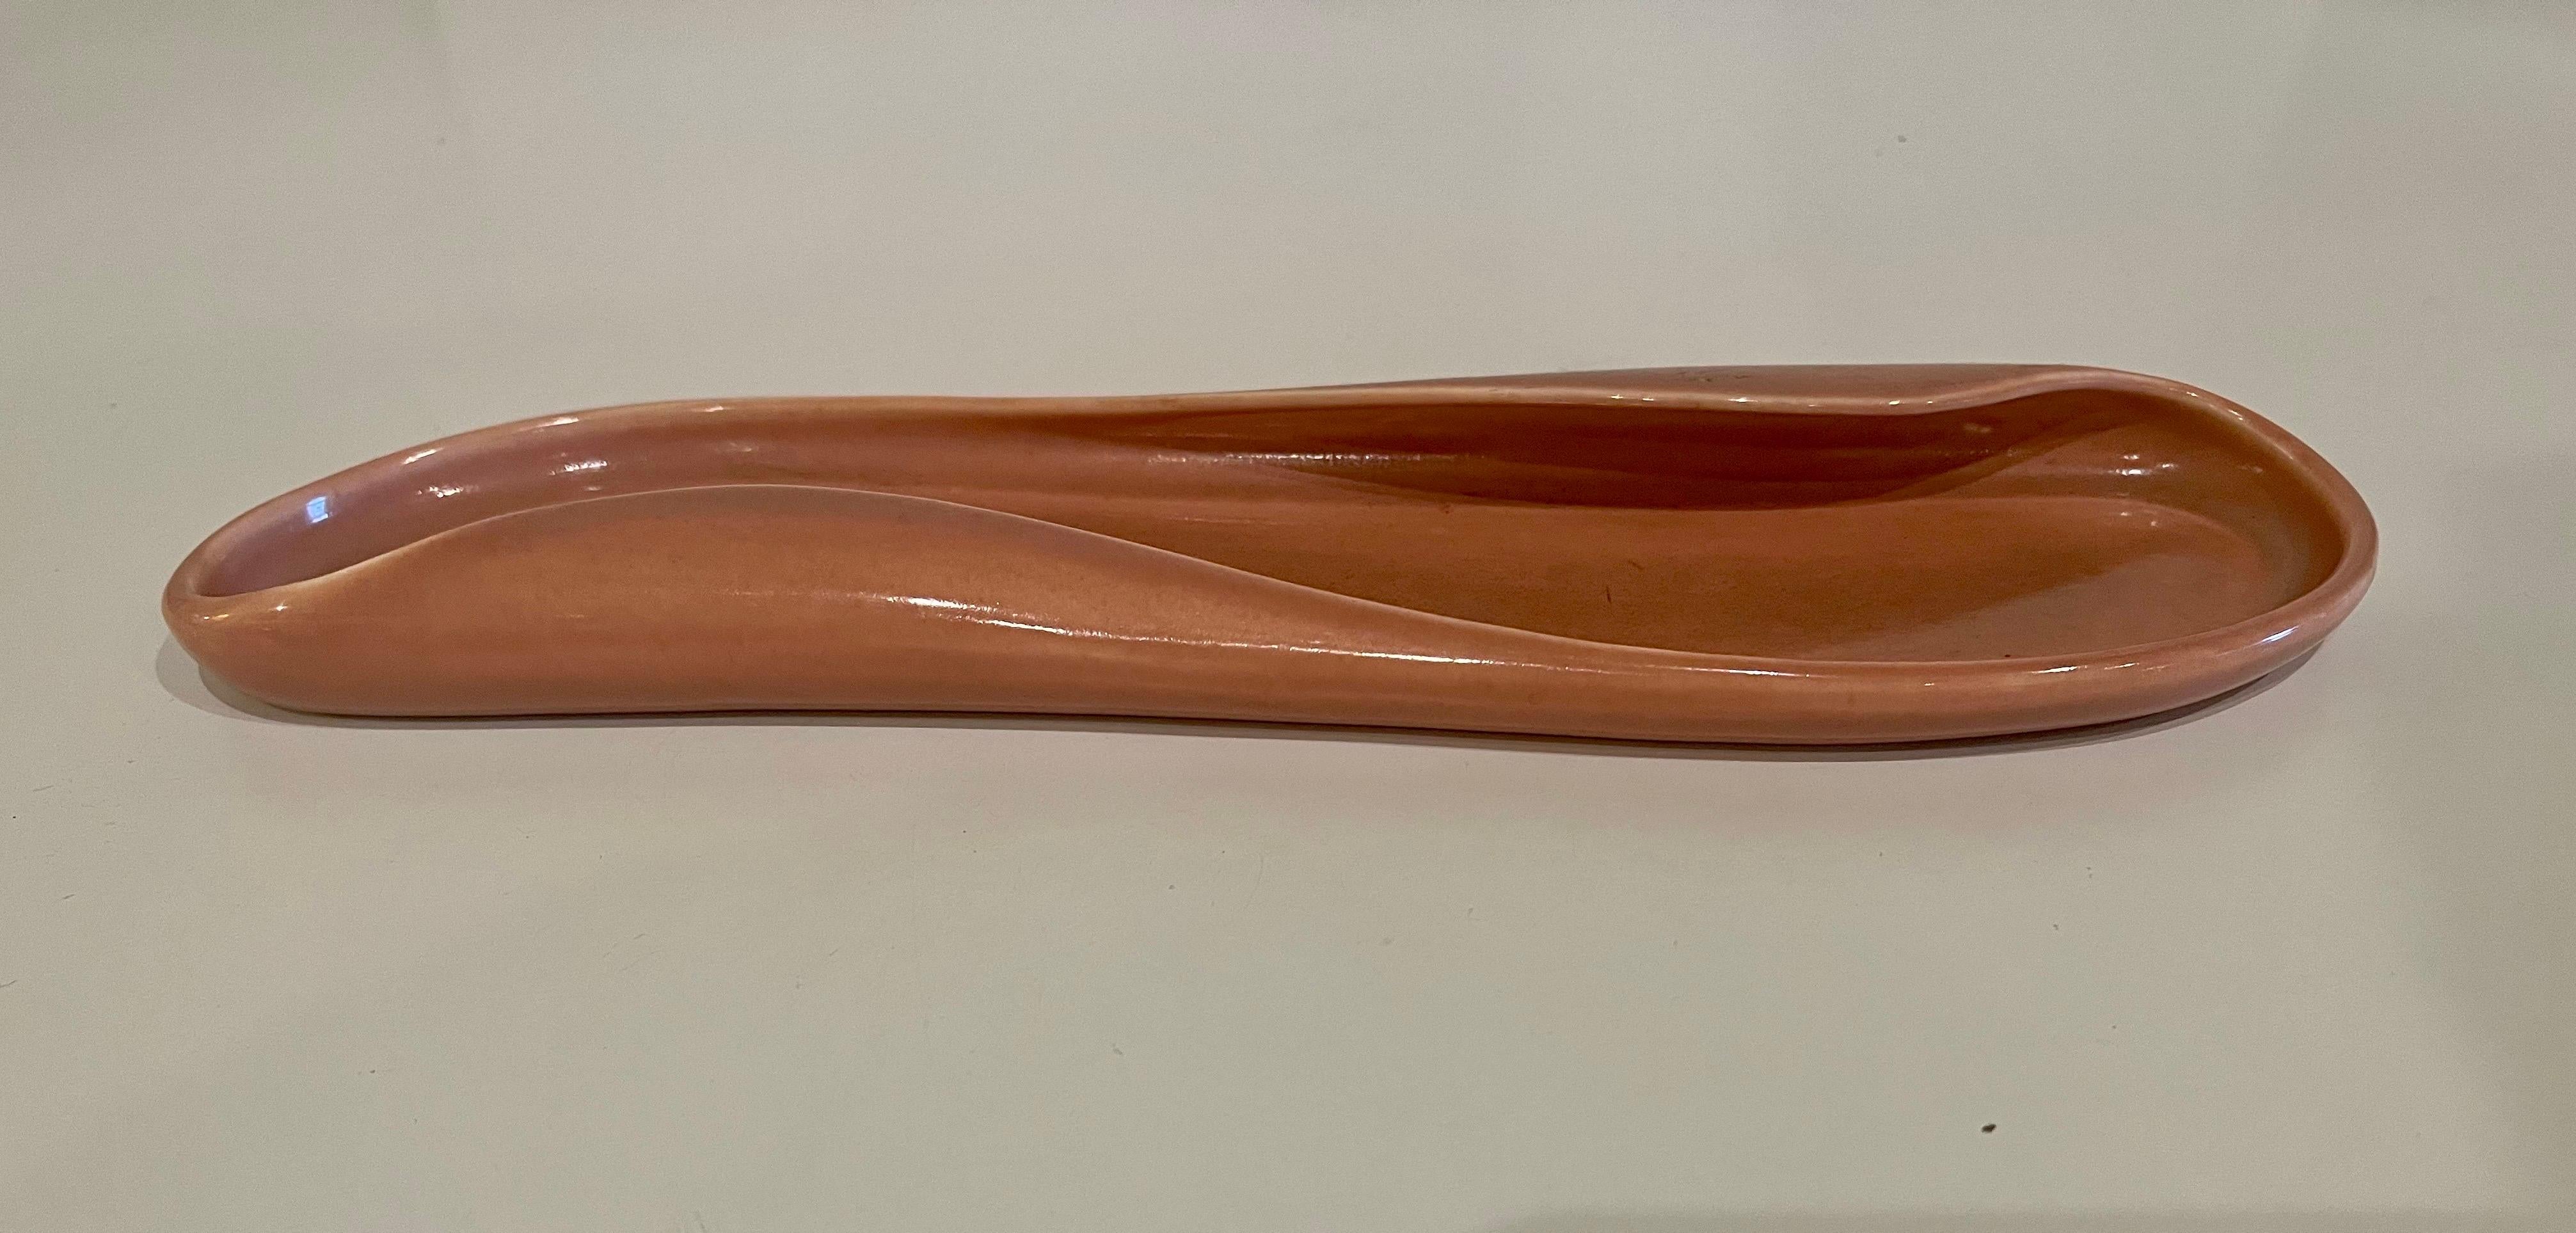 Glazed American Modern Ceramic Celery Tray by Russel Wright for Steubenville Pottery For Sale